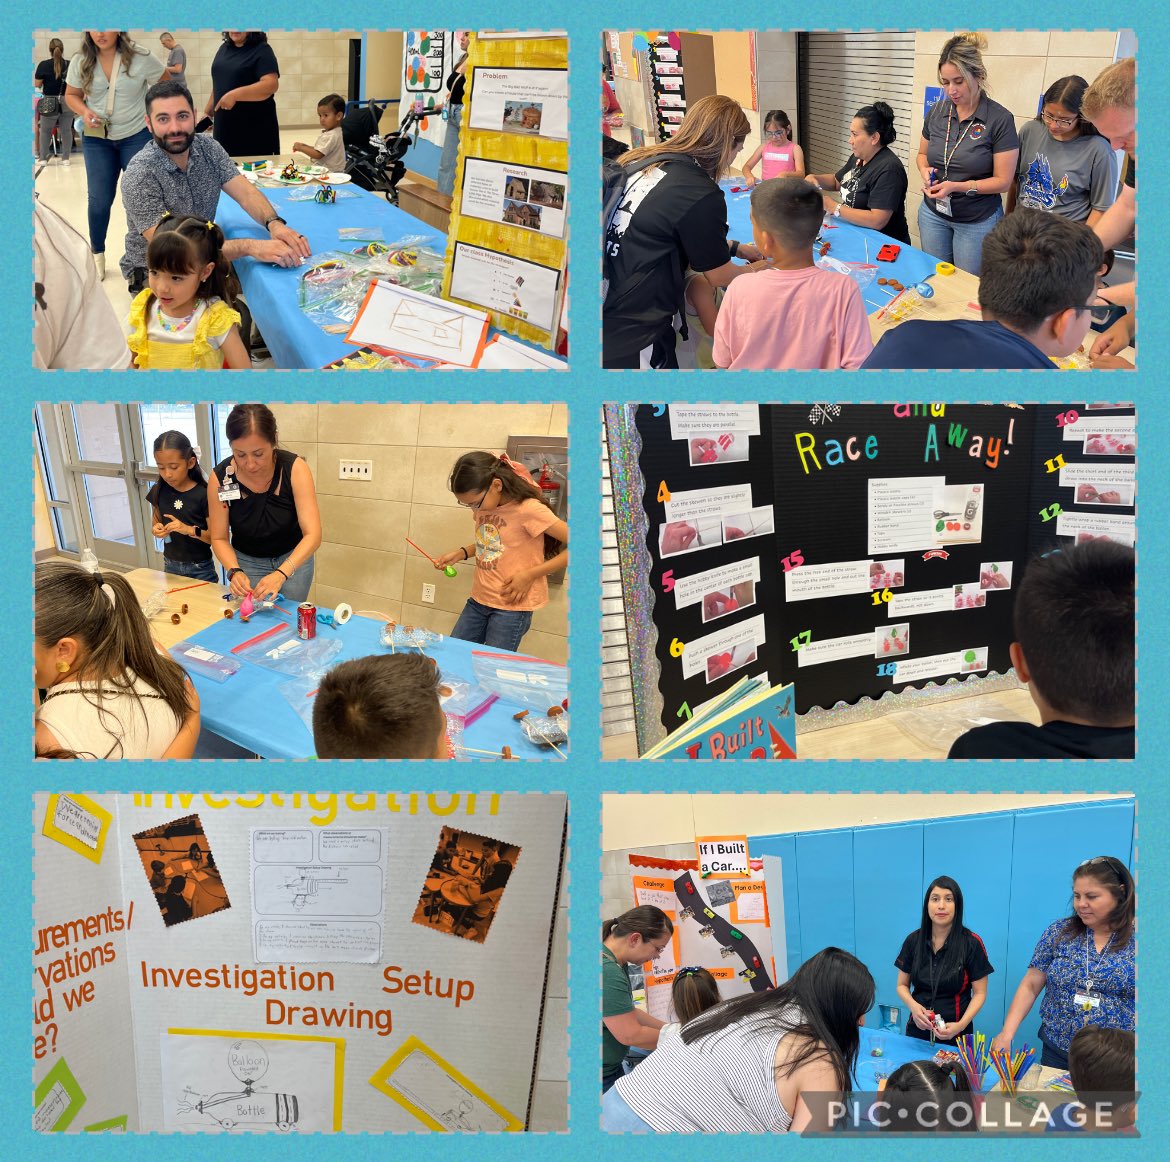 Incorporating science and literacy= Storybook STEM Night 📚🥼🧪🔬at Tierra Del Sol. Sundancers faculty and staff always go above and beyond for our students. Special thanks to Hanks Robotics for joining in the fun. @TierraDelSol_ES @TDS_Library @pattyh79912 @YsletaISD